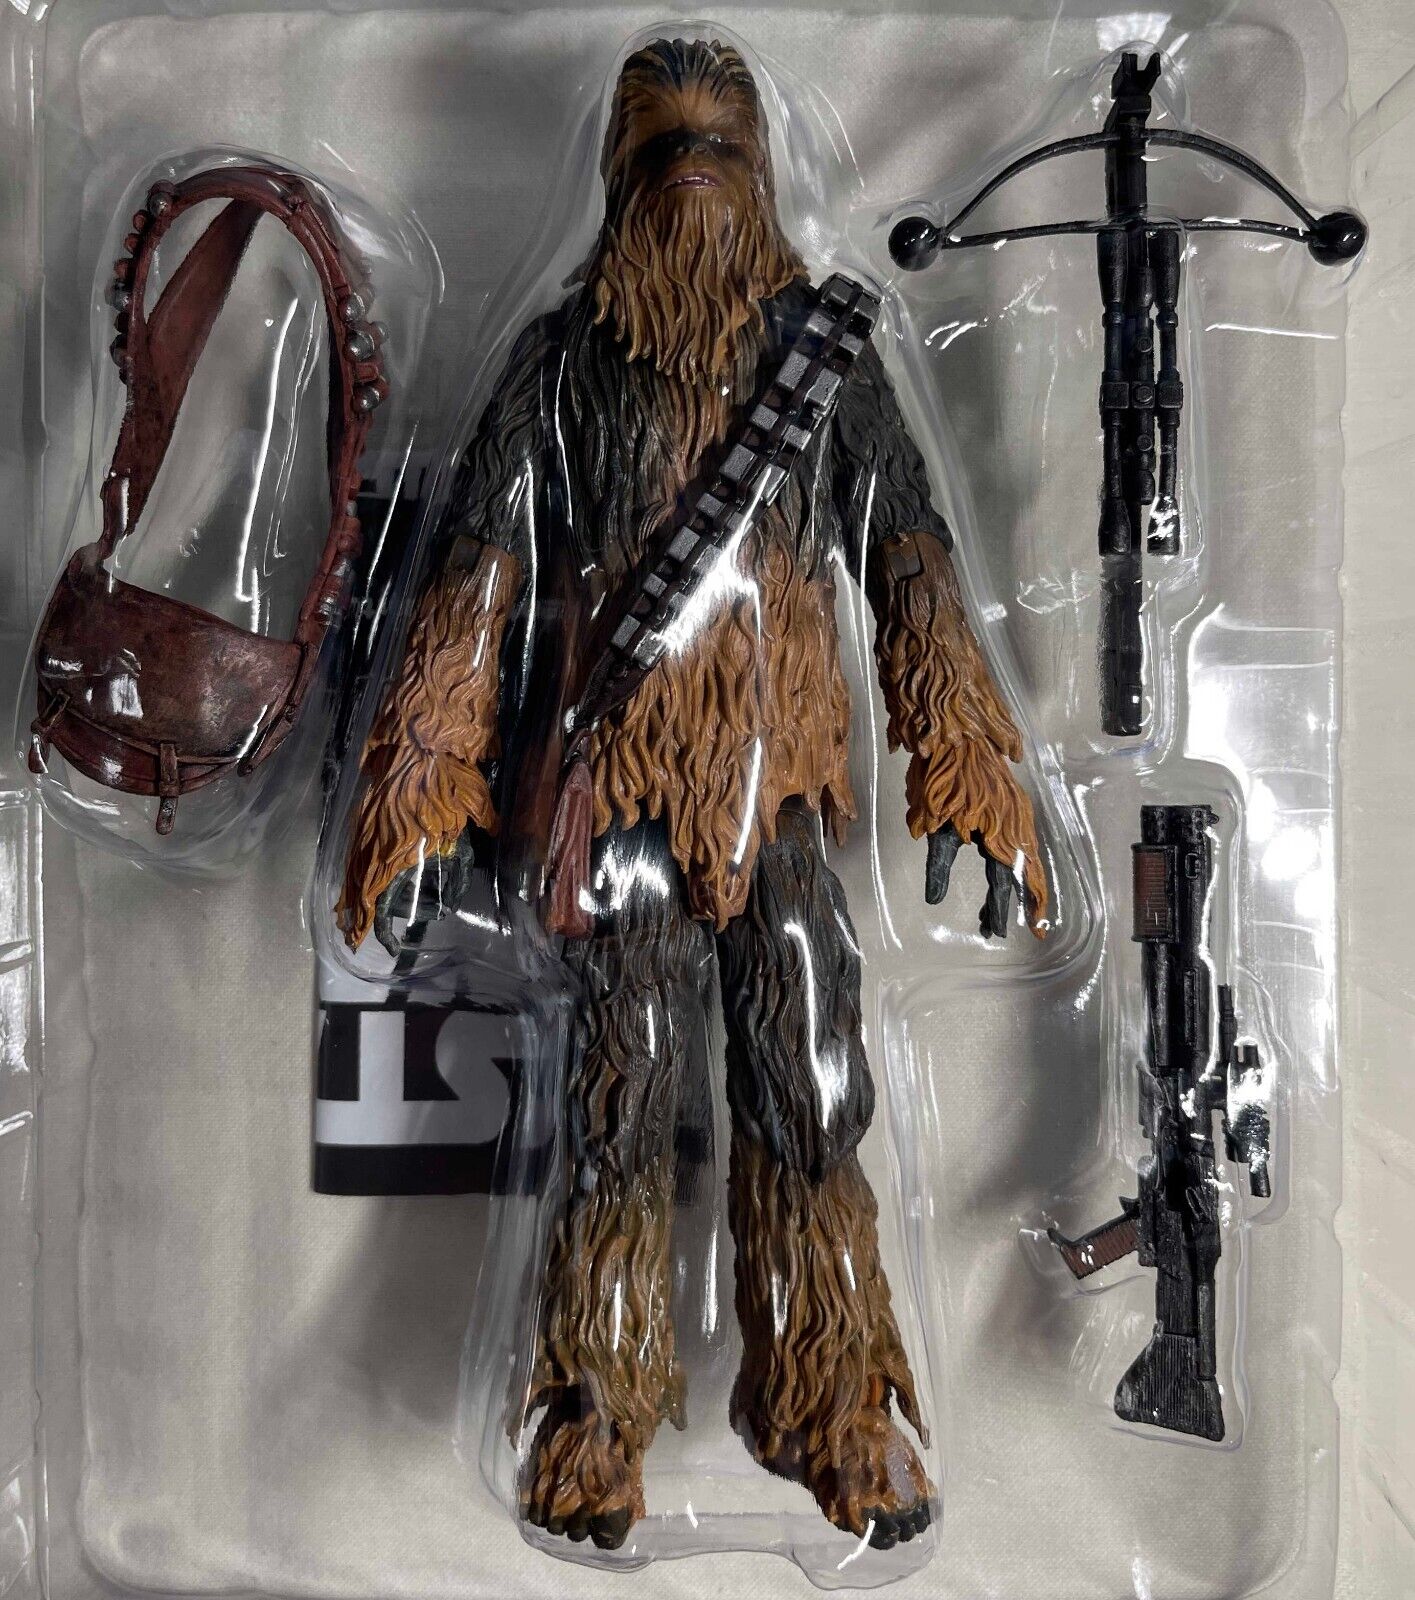 2020 STAR WARS/DISNEY EXCLSUIVE DIAMOND SELECT Loose CHEWBACCA 8" Figure NEW